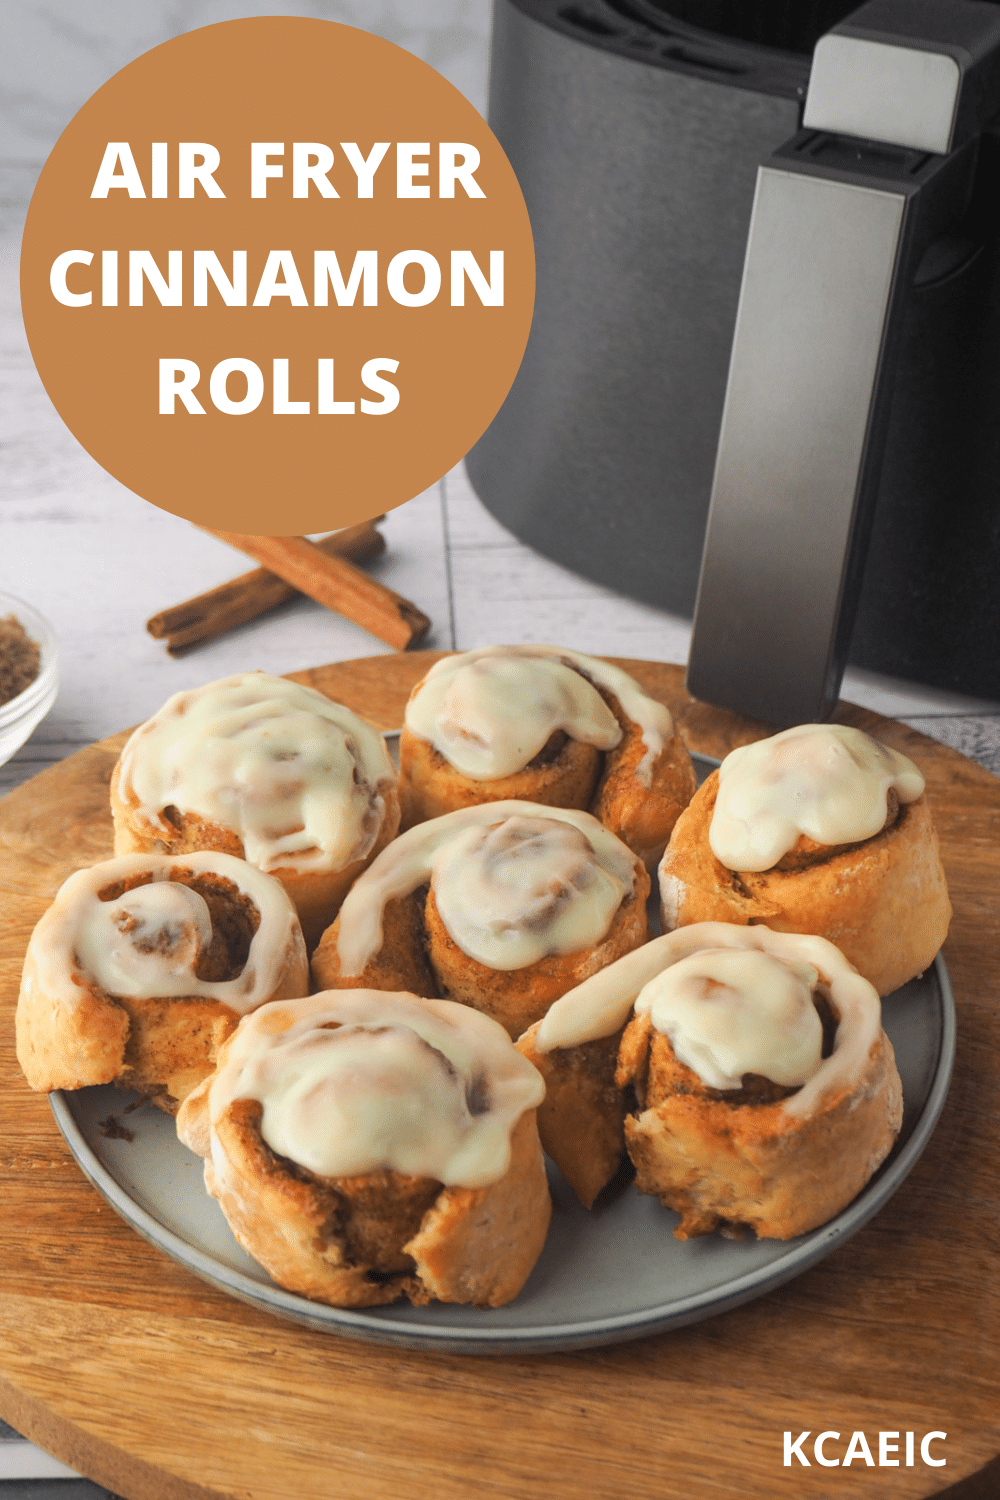 Scrolls on a plate, with air fryer in the background and text overlay, air fryer cinnamon scrolls and KCAEIC.